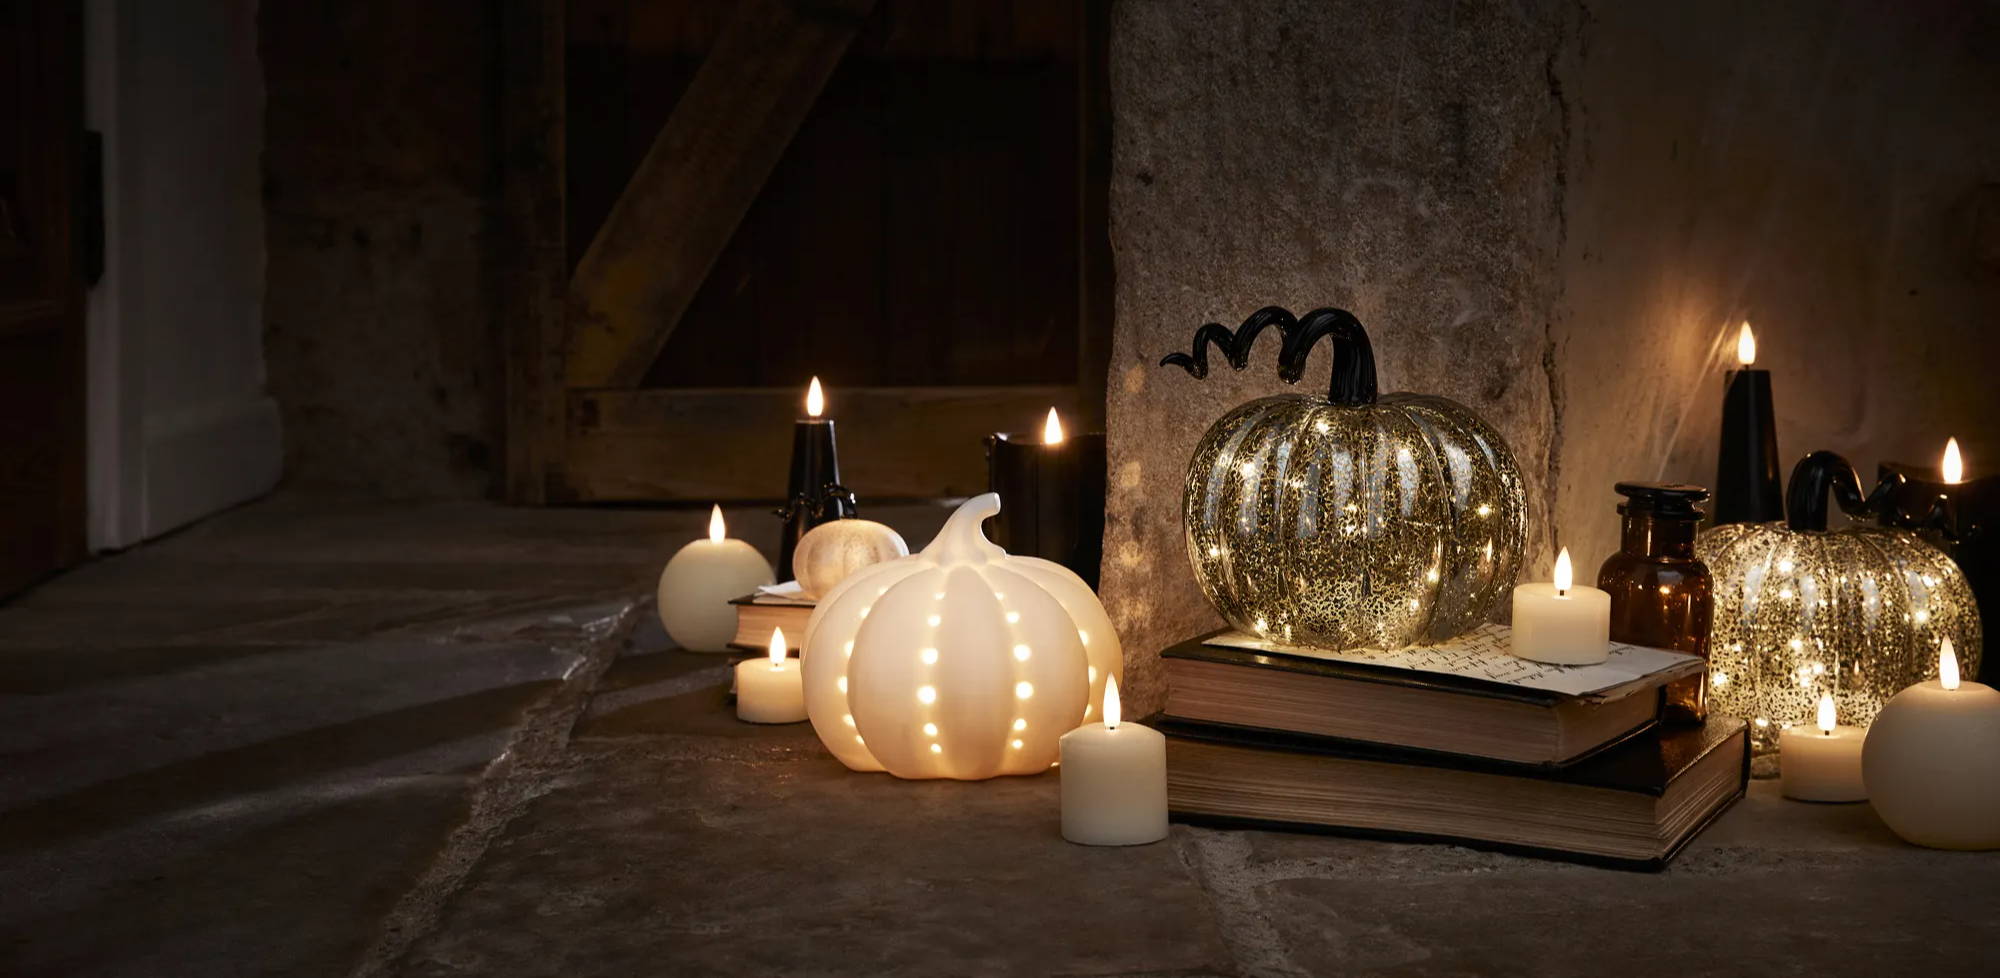 https://www.lights4fun.co.uk/collections/halloween-decorations